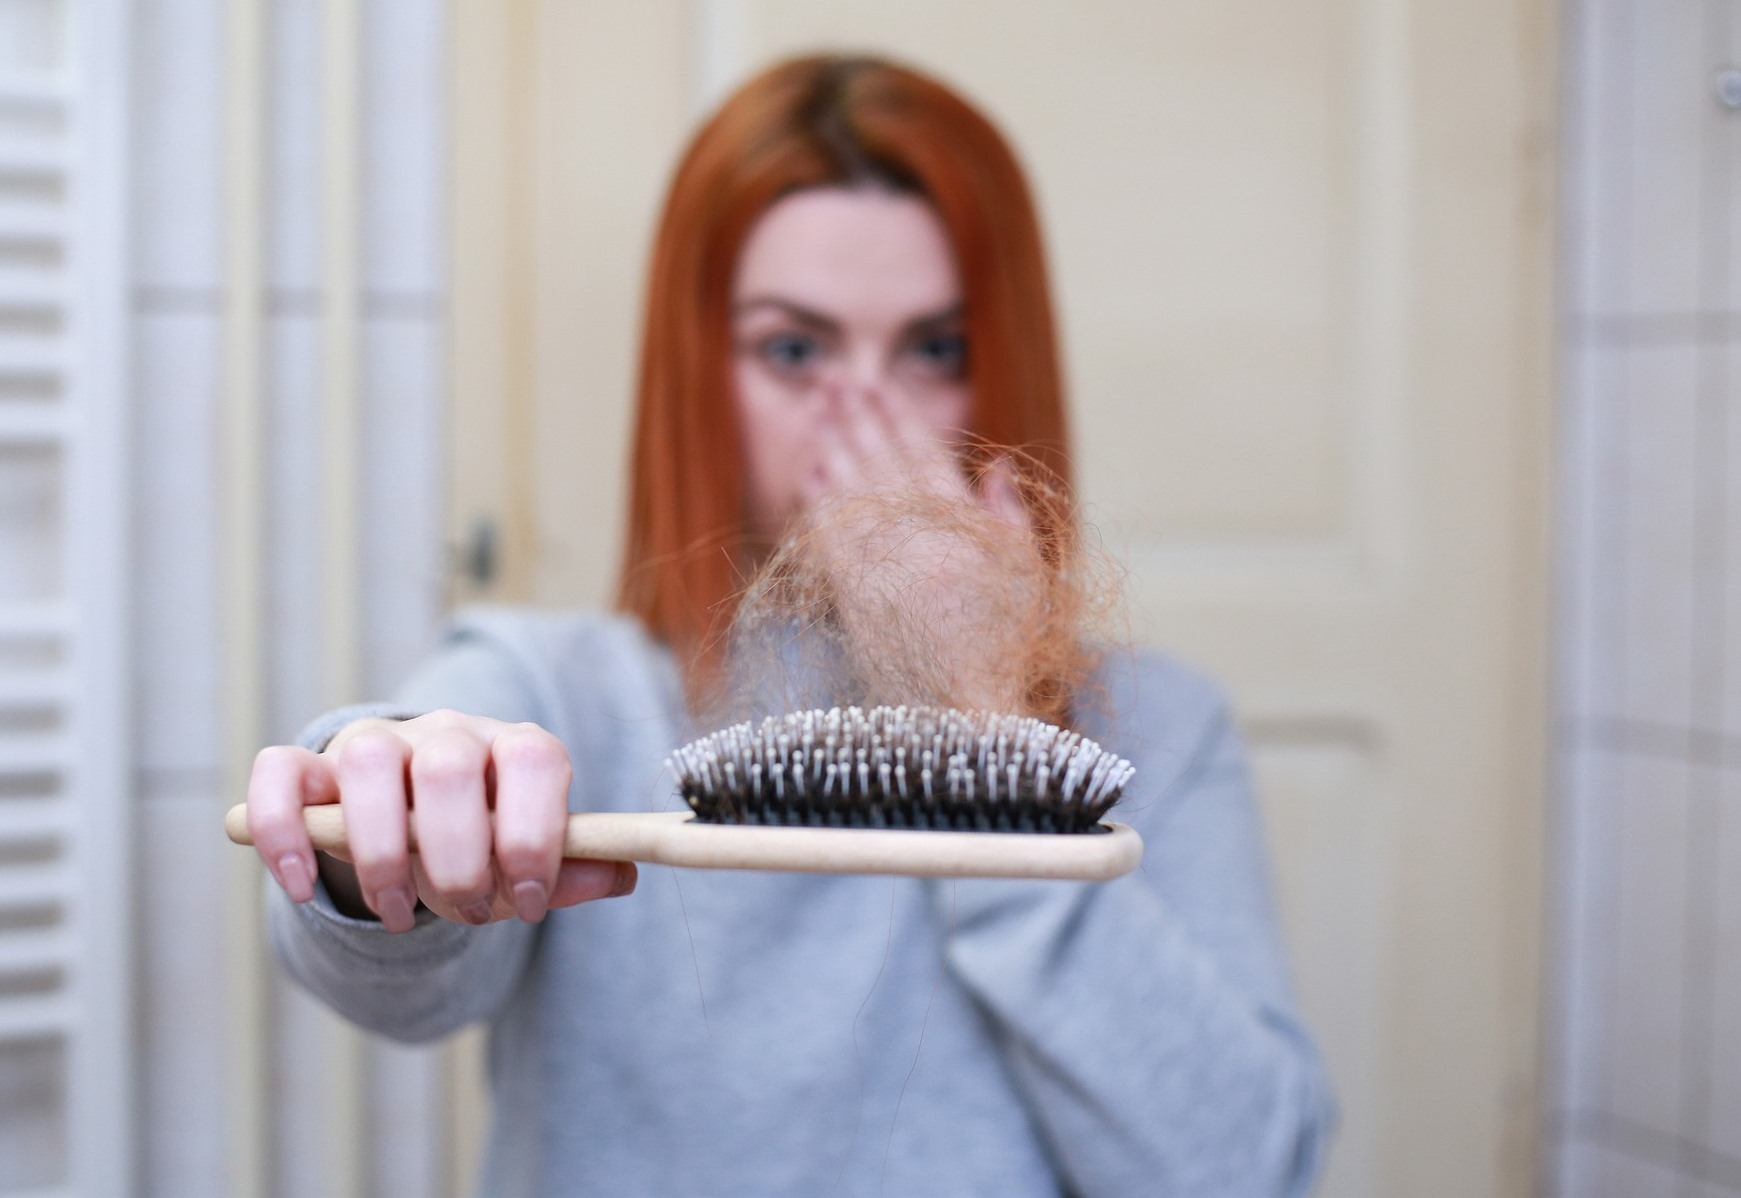 Why Your Hair Smells Burnt: Causes, Solutions » Scary Symptoms